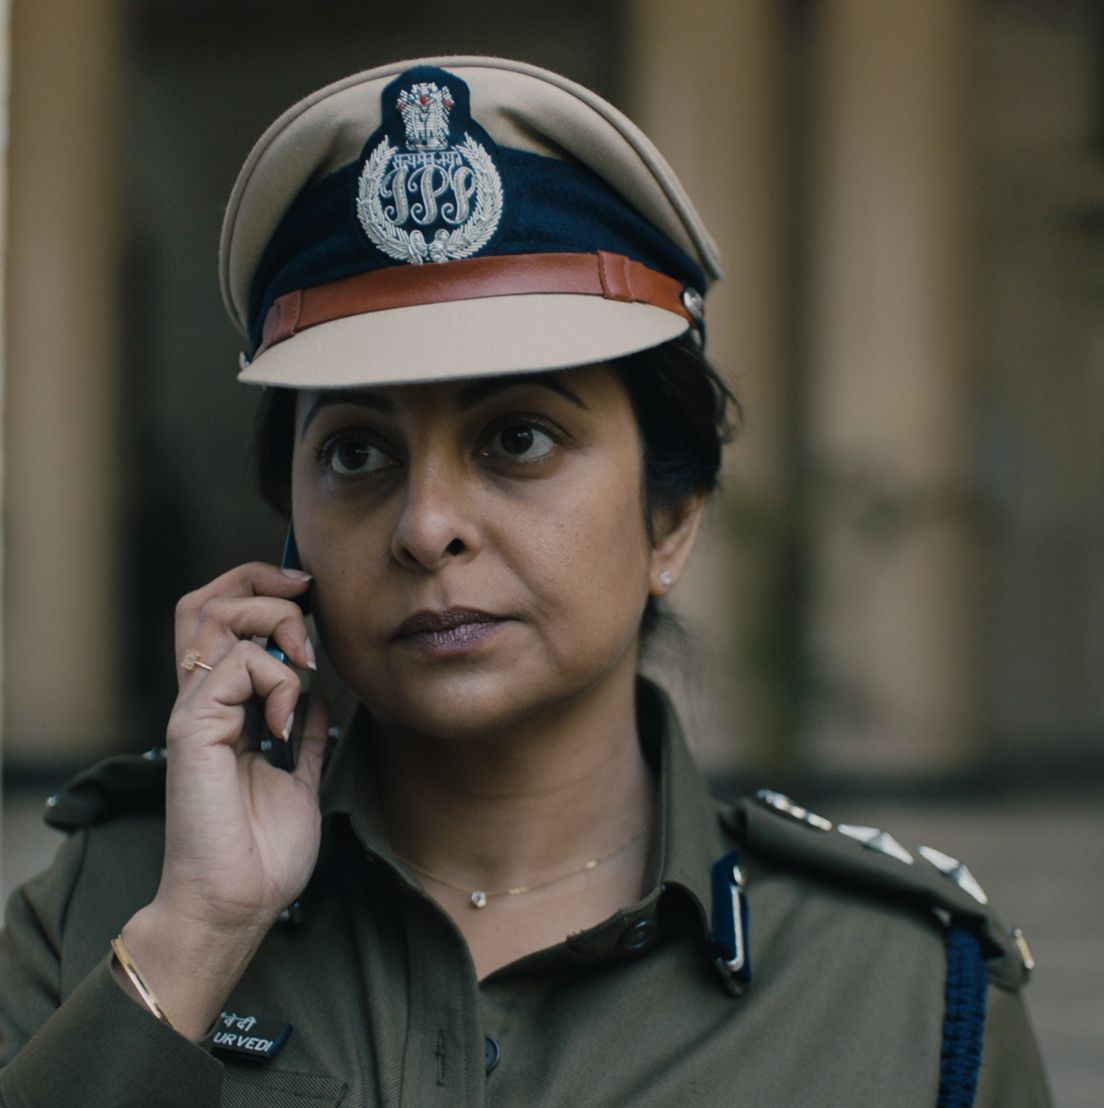 Police Rep Sex Xxx Video Hd - The True Story Behind Netflix's 'Delhi Crime' Is Absolutely Horrific